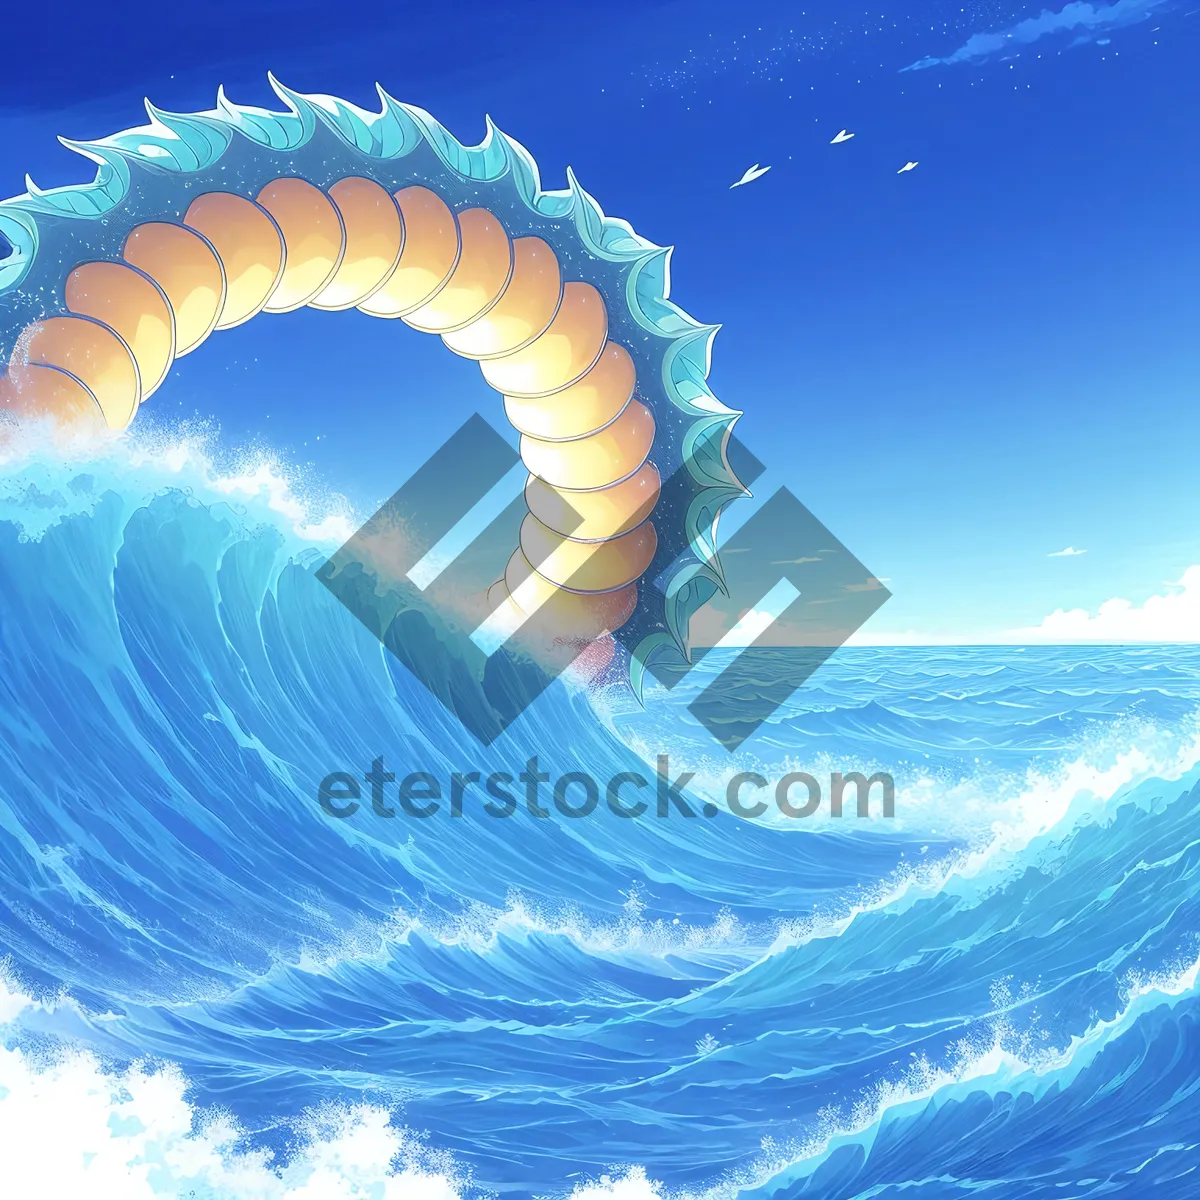 Picture of Serene Ocean Side Bliss: Surfer Riding Majestic Waves